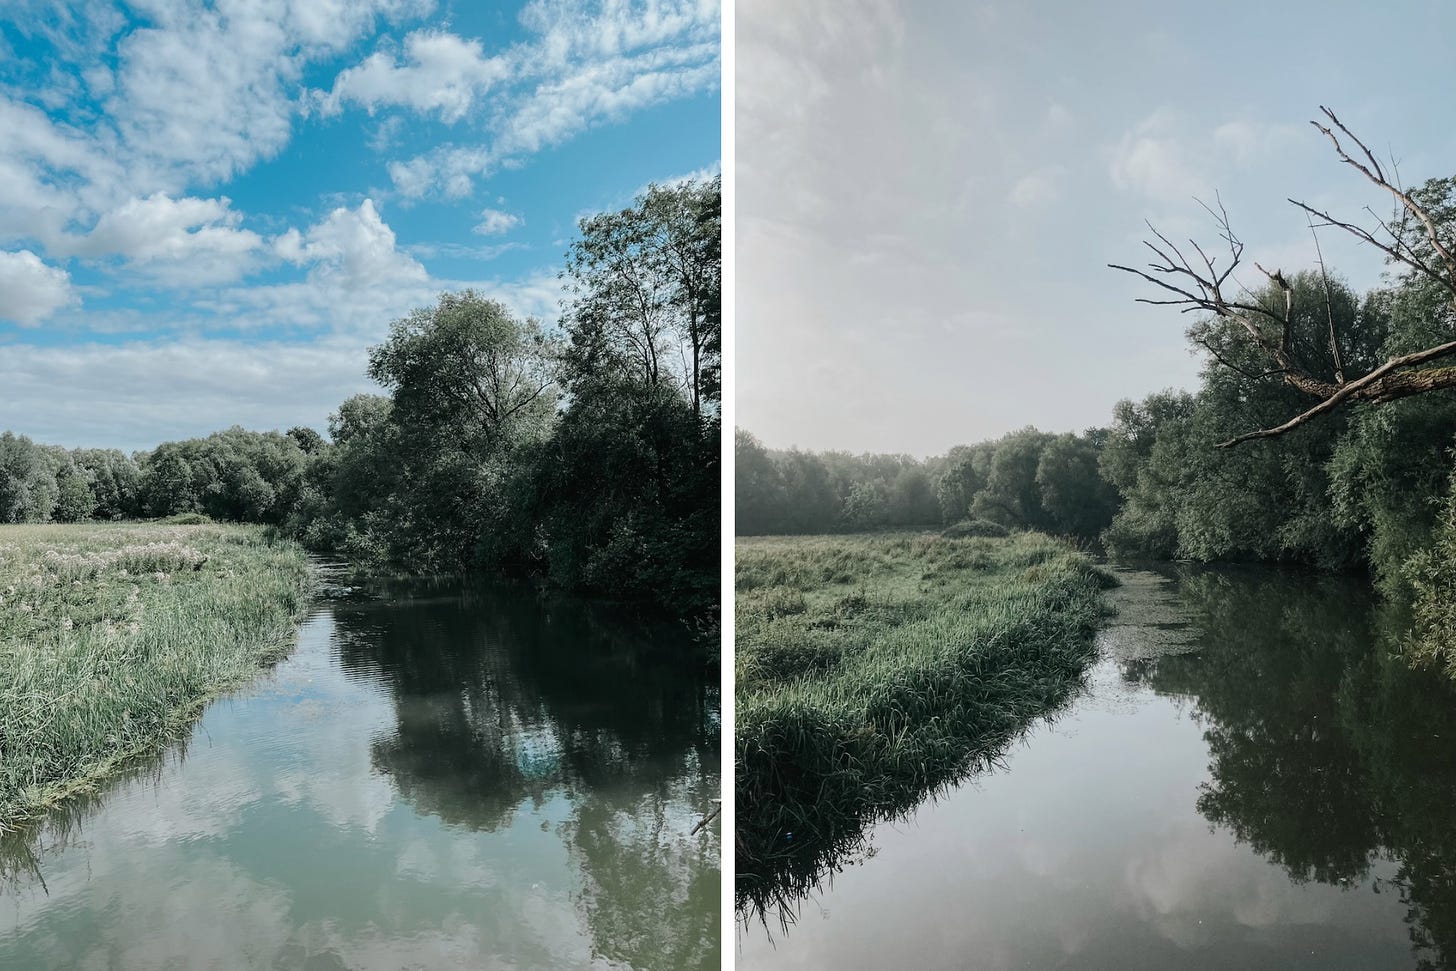 Two views of a river, one with scattered clouds, the other with hazy sunshine